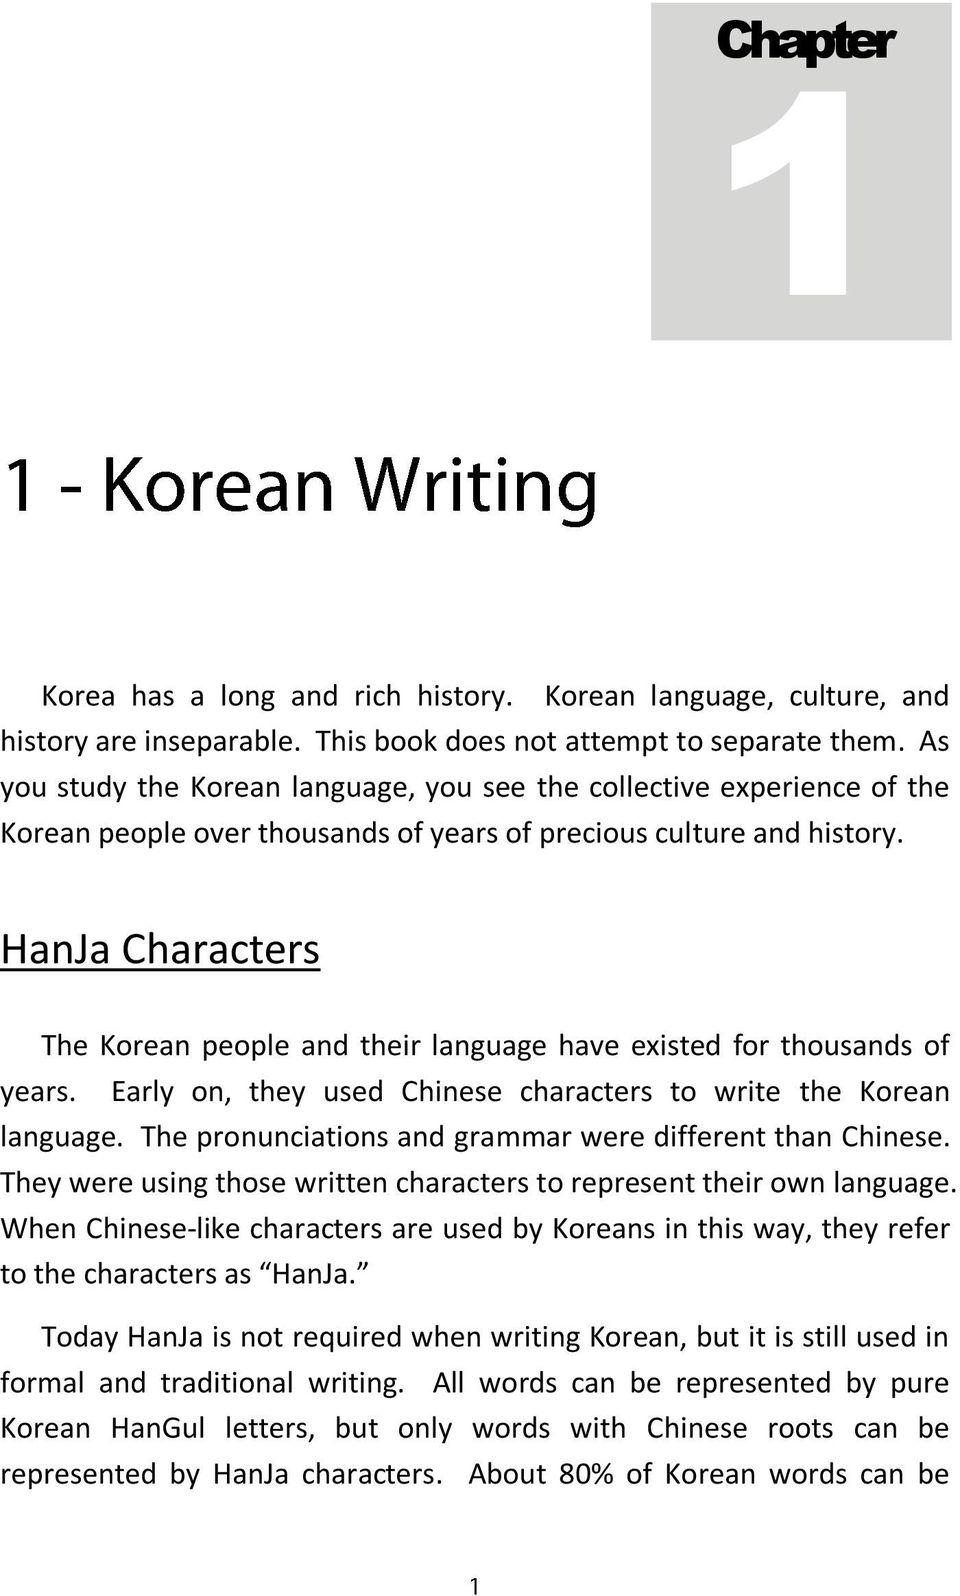 HanJa Characters The Korean people and their language have existed for thousands of years. Early on, they used Chinese characters to write the Korean language.